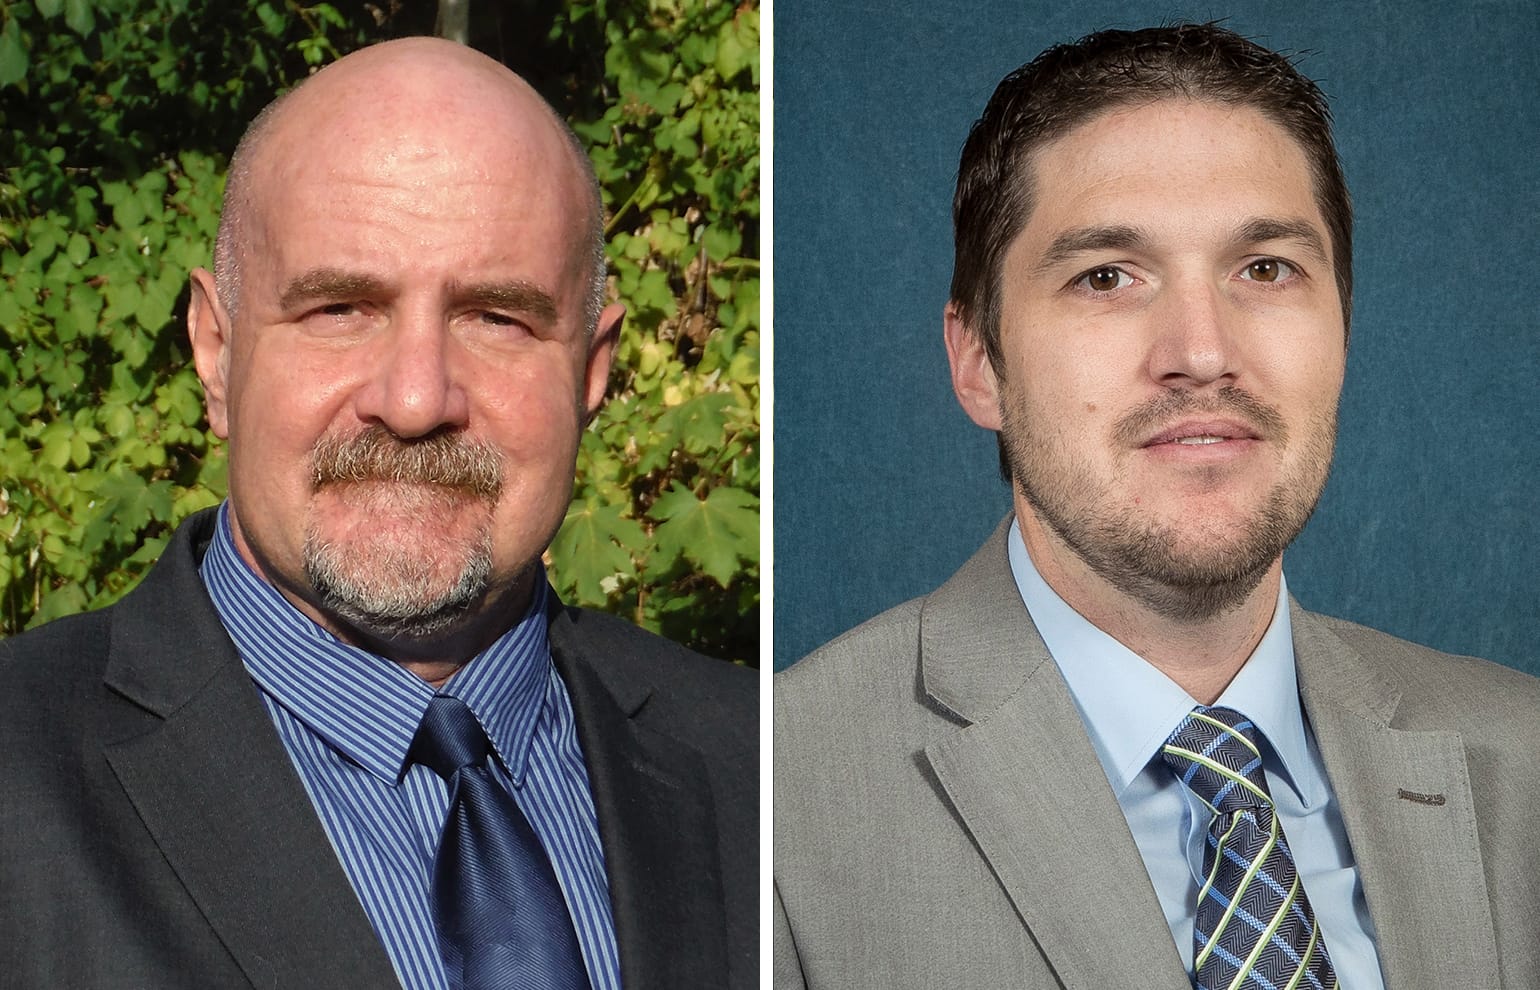 Dan Chandler, left, assistant county administrator for Clackamas County, Ore., and Randall Partington, administrator for Finney County, Kan., are a finalists for the open Clark County manager position.